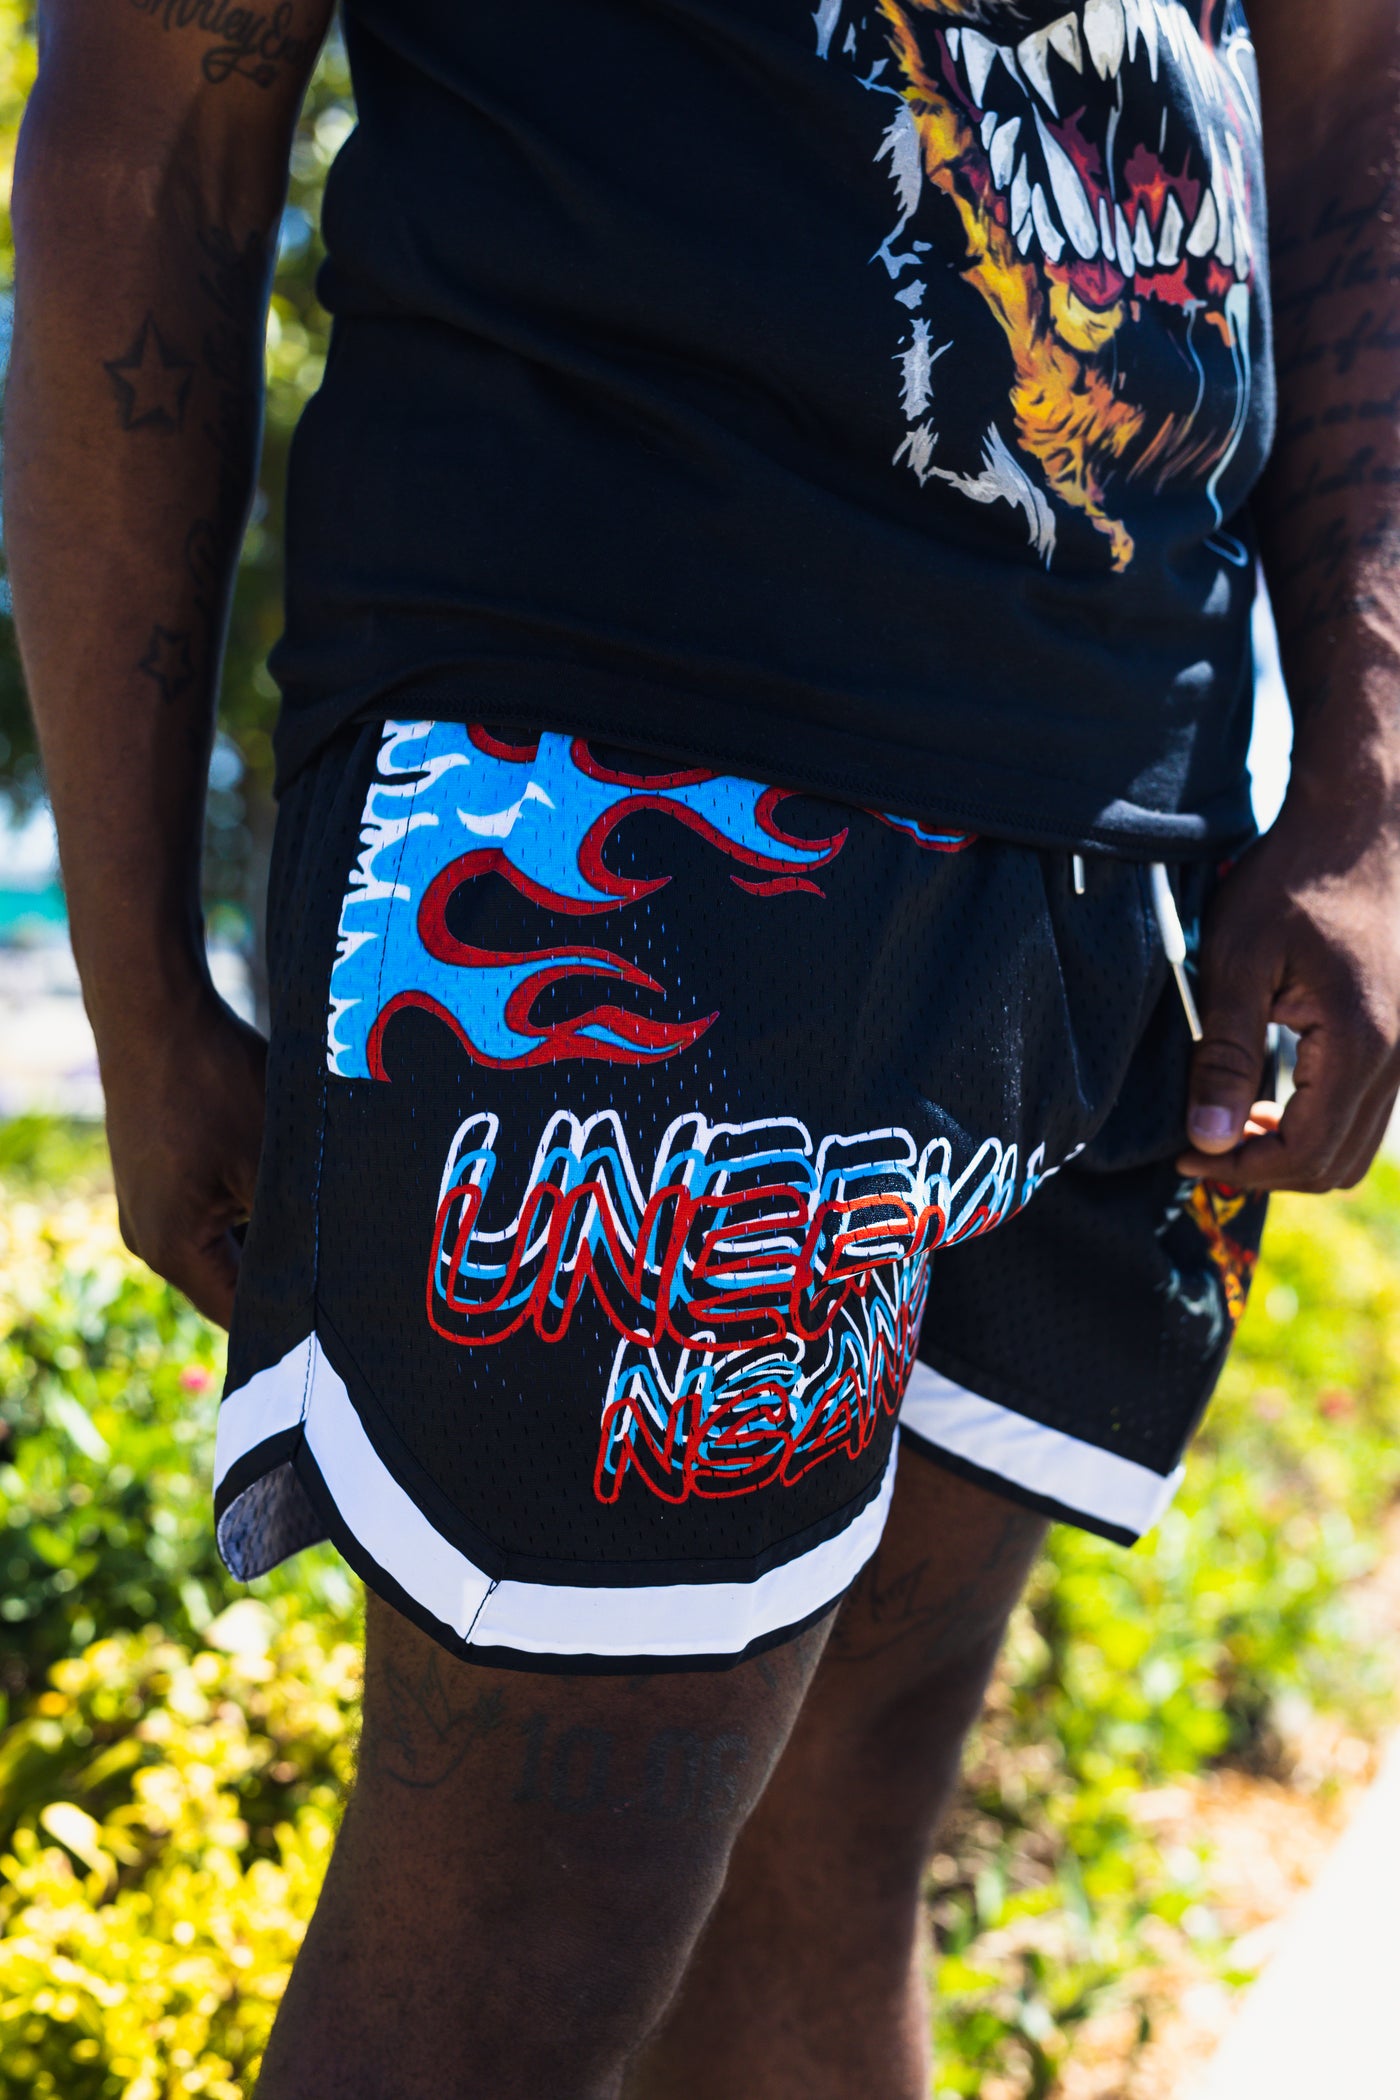 Nsane Big Dog Shorts - Unique Sweatsuits, hats, tees, shorts, hoodies, Outwear & accessories online | Uneekly Nsane